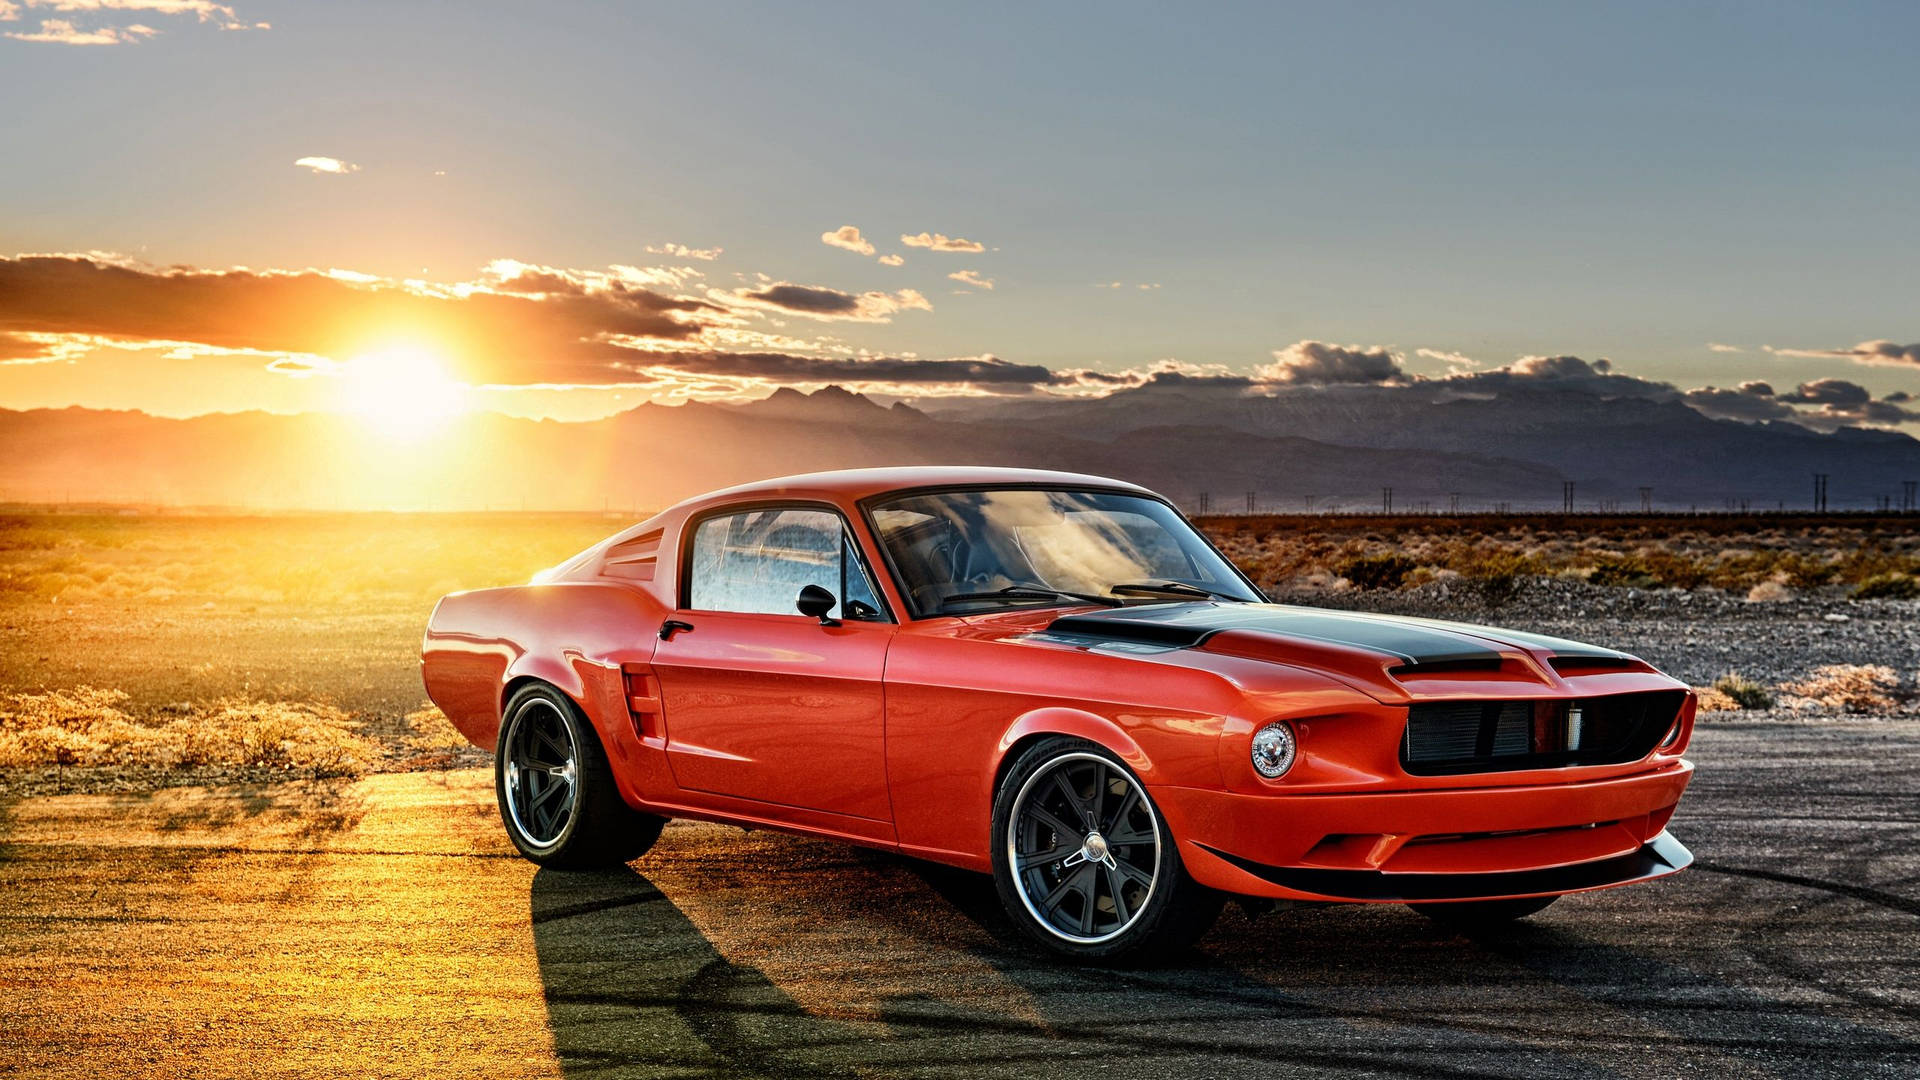 2560 X 1440 Car Red 1968 Ford Mustang Picture